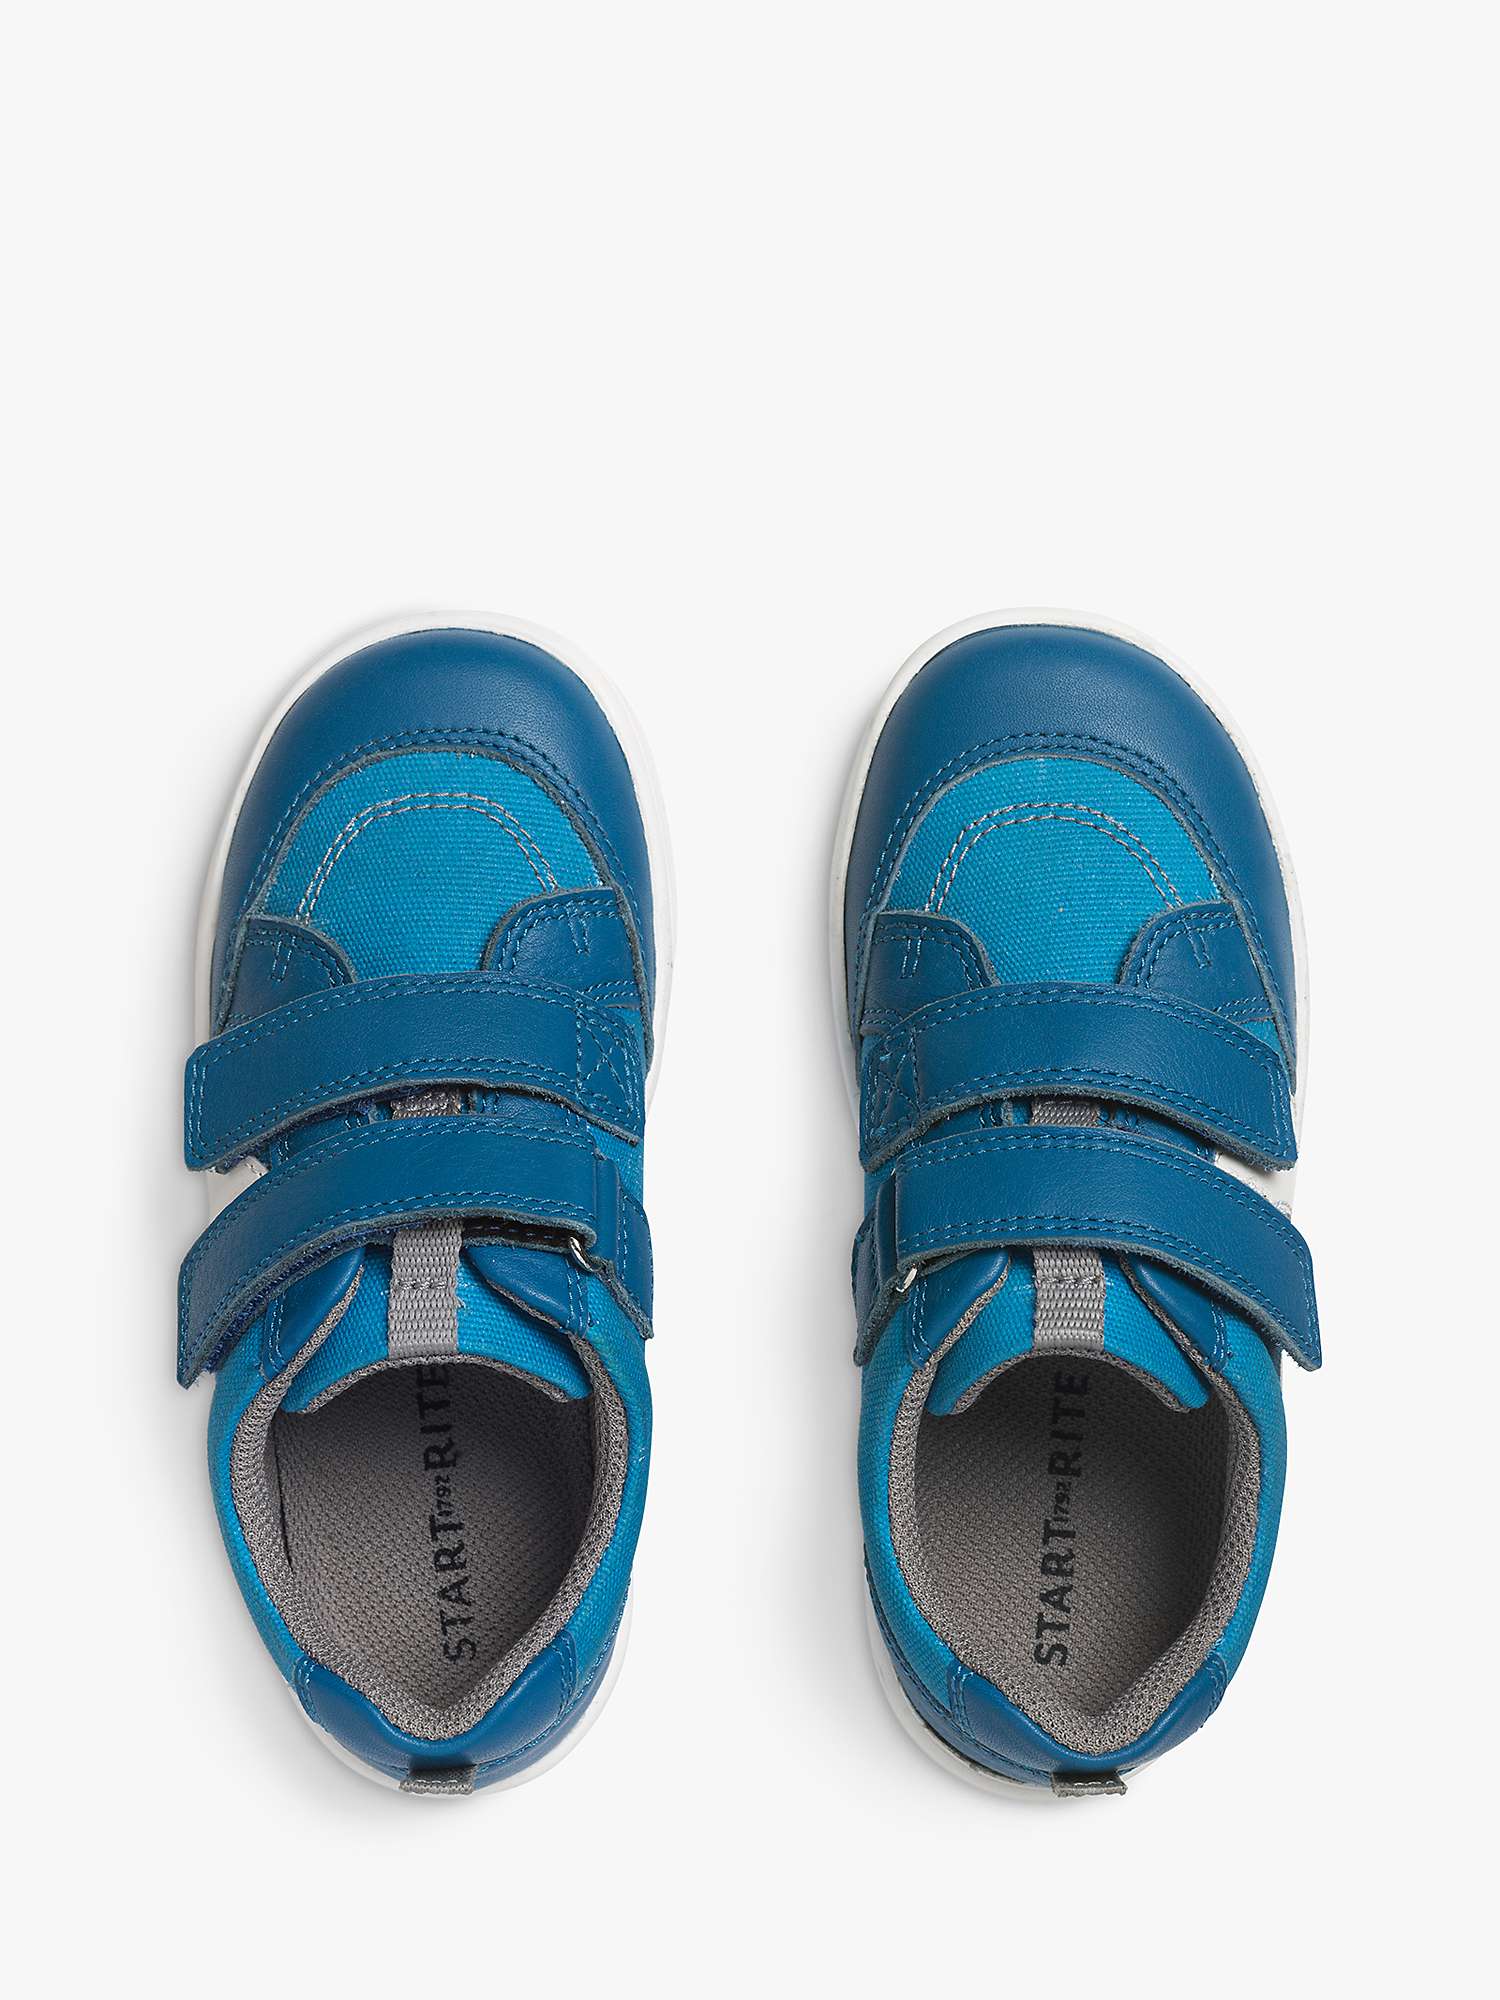 Buy Start-Rite Kids' Enigma Leather Trainers, Bright Blue Online at johnlewis.com